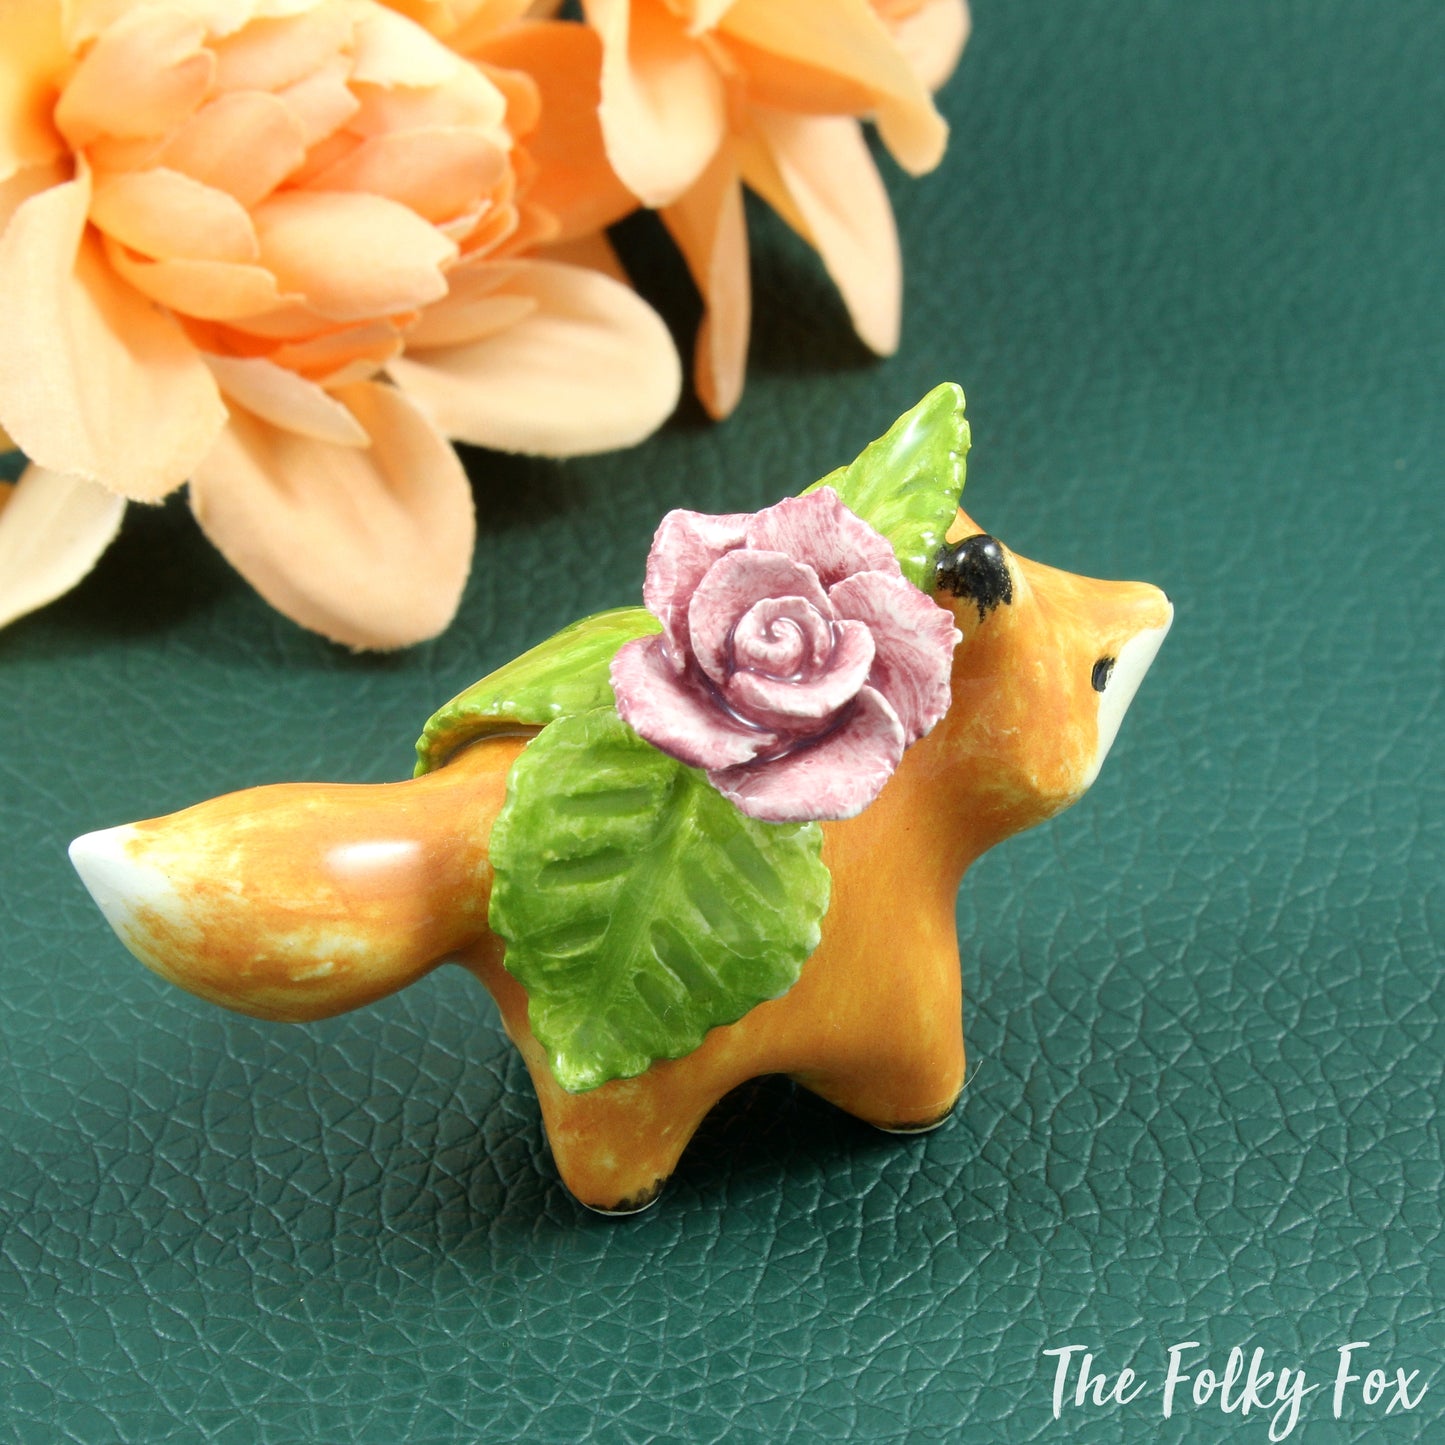 Fox with Rose Sculpture in Ceramic - The Folky Fox